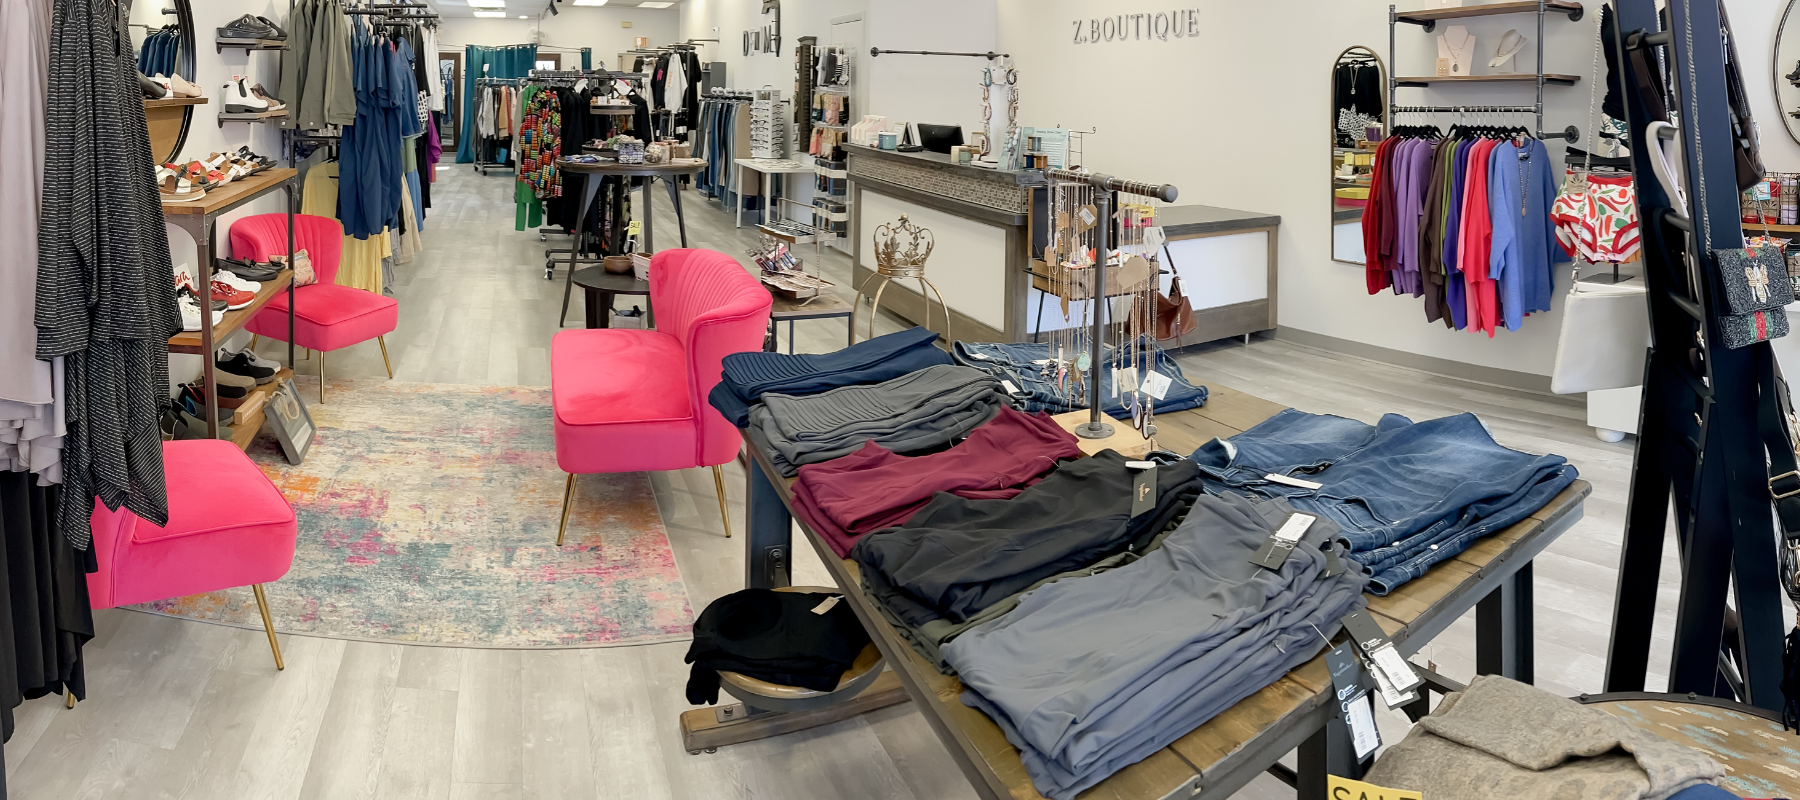 A photo of the inside of Z Boutique featuring a table with folded plus-size leggings and jeans, pink chairs, a shoe sections and various other plus-size clothing and accessories.